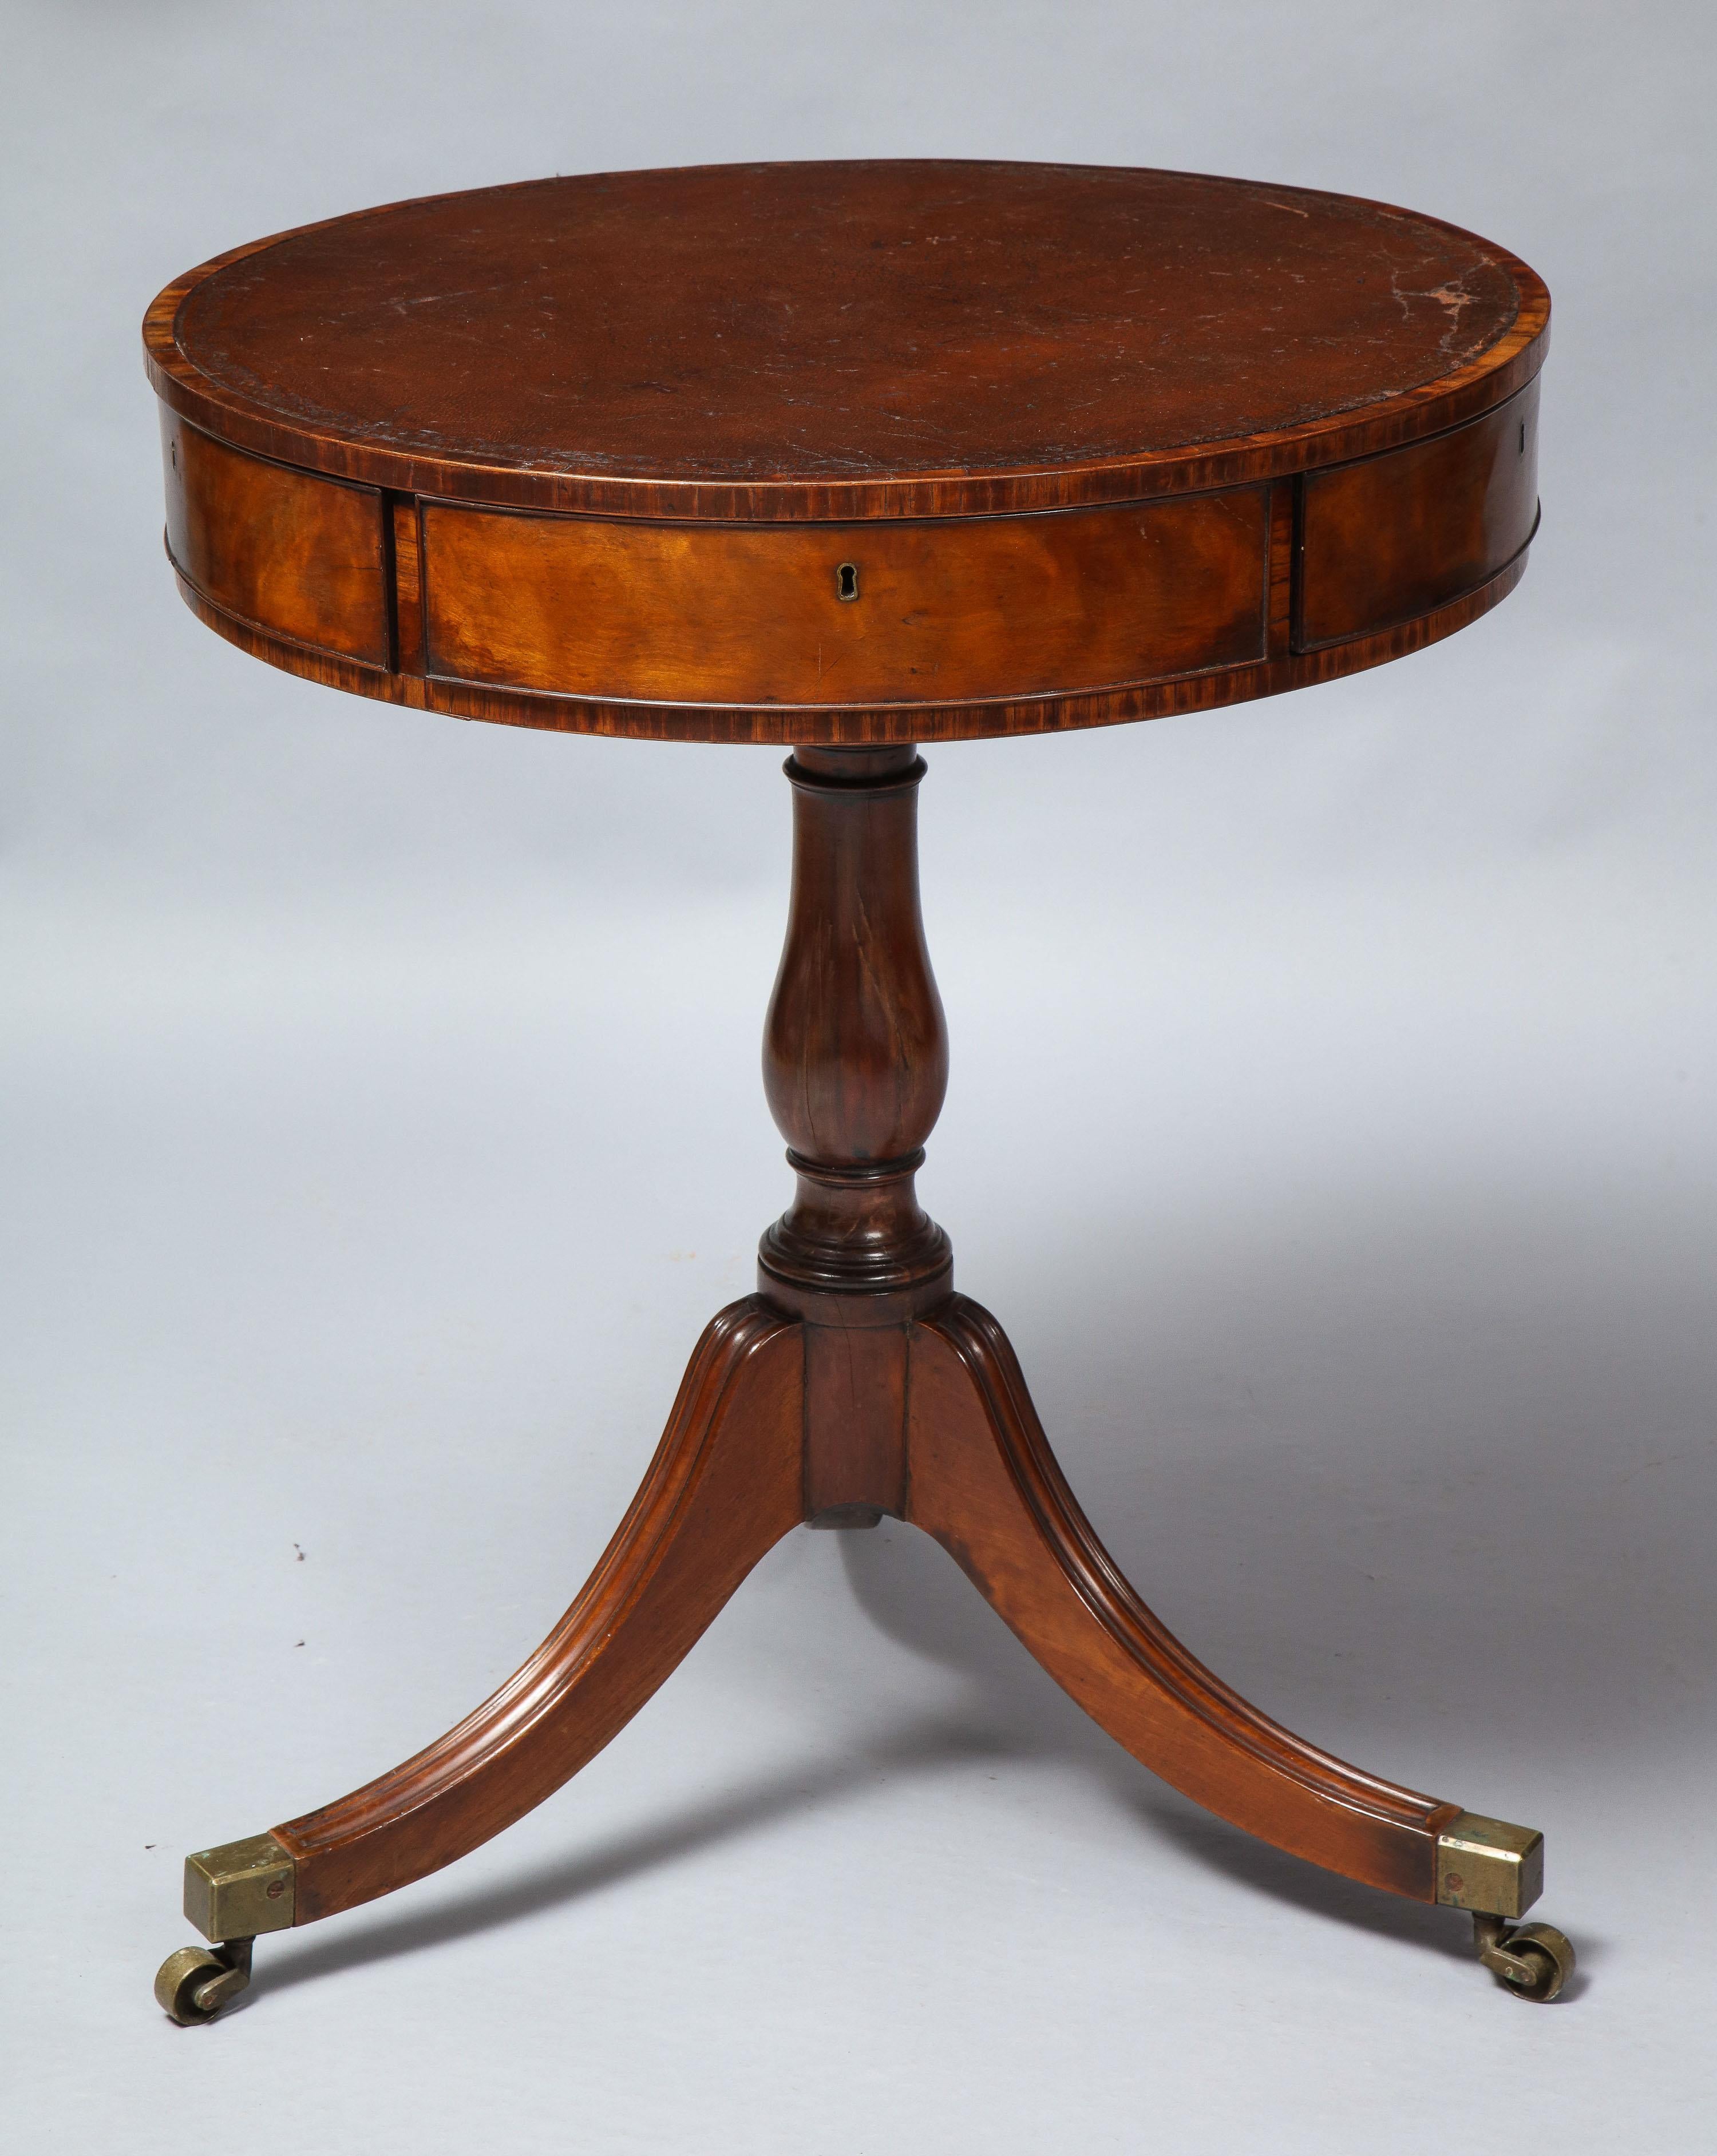 Fine George III period drum table, the distressed tooled leather top with rosewood cross banding, the four wedge shaped drawers with vividly grained mahogany fronts and retaining original locks and escutcheons, supported by turned mahogany shaft and